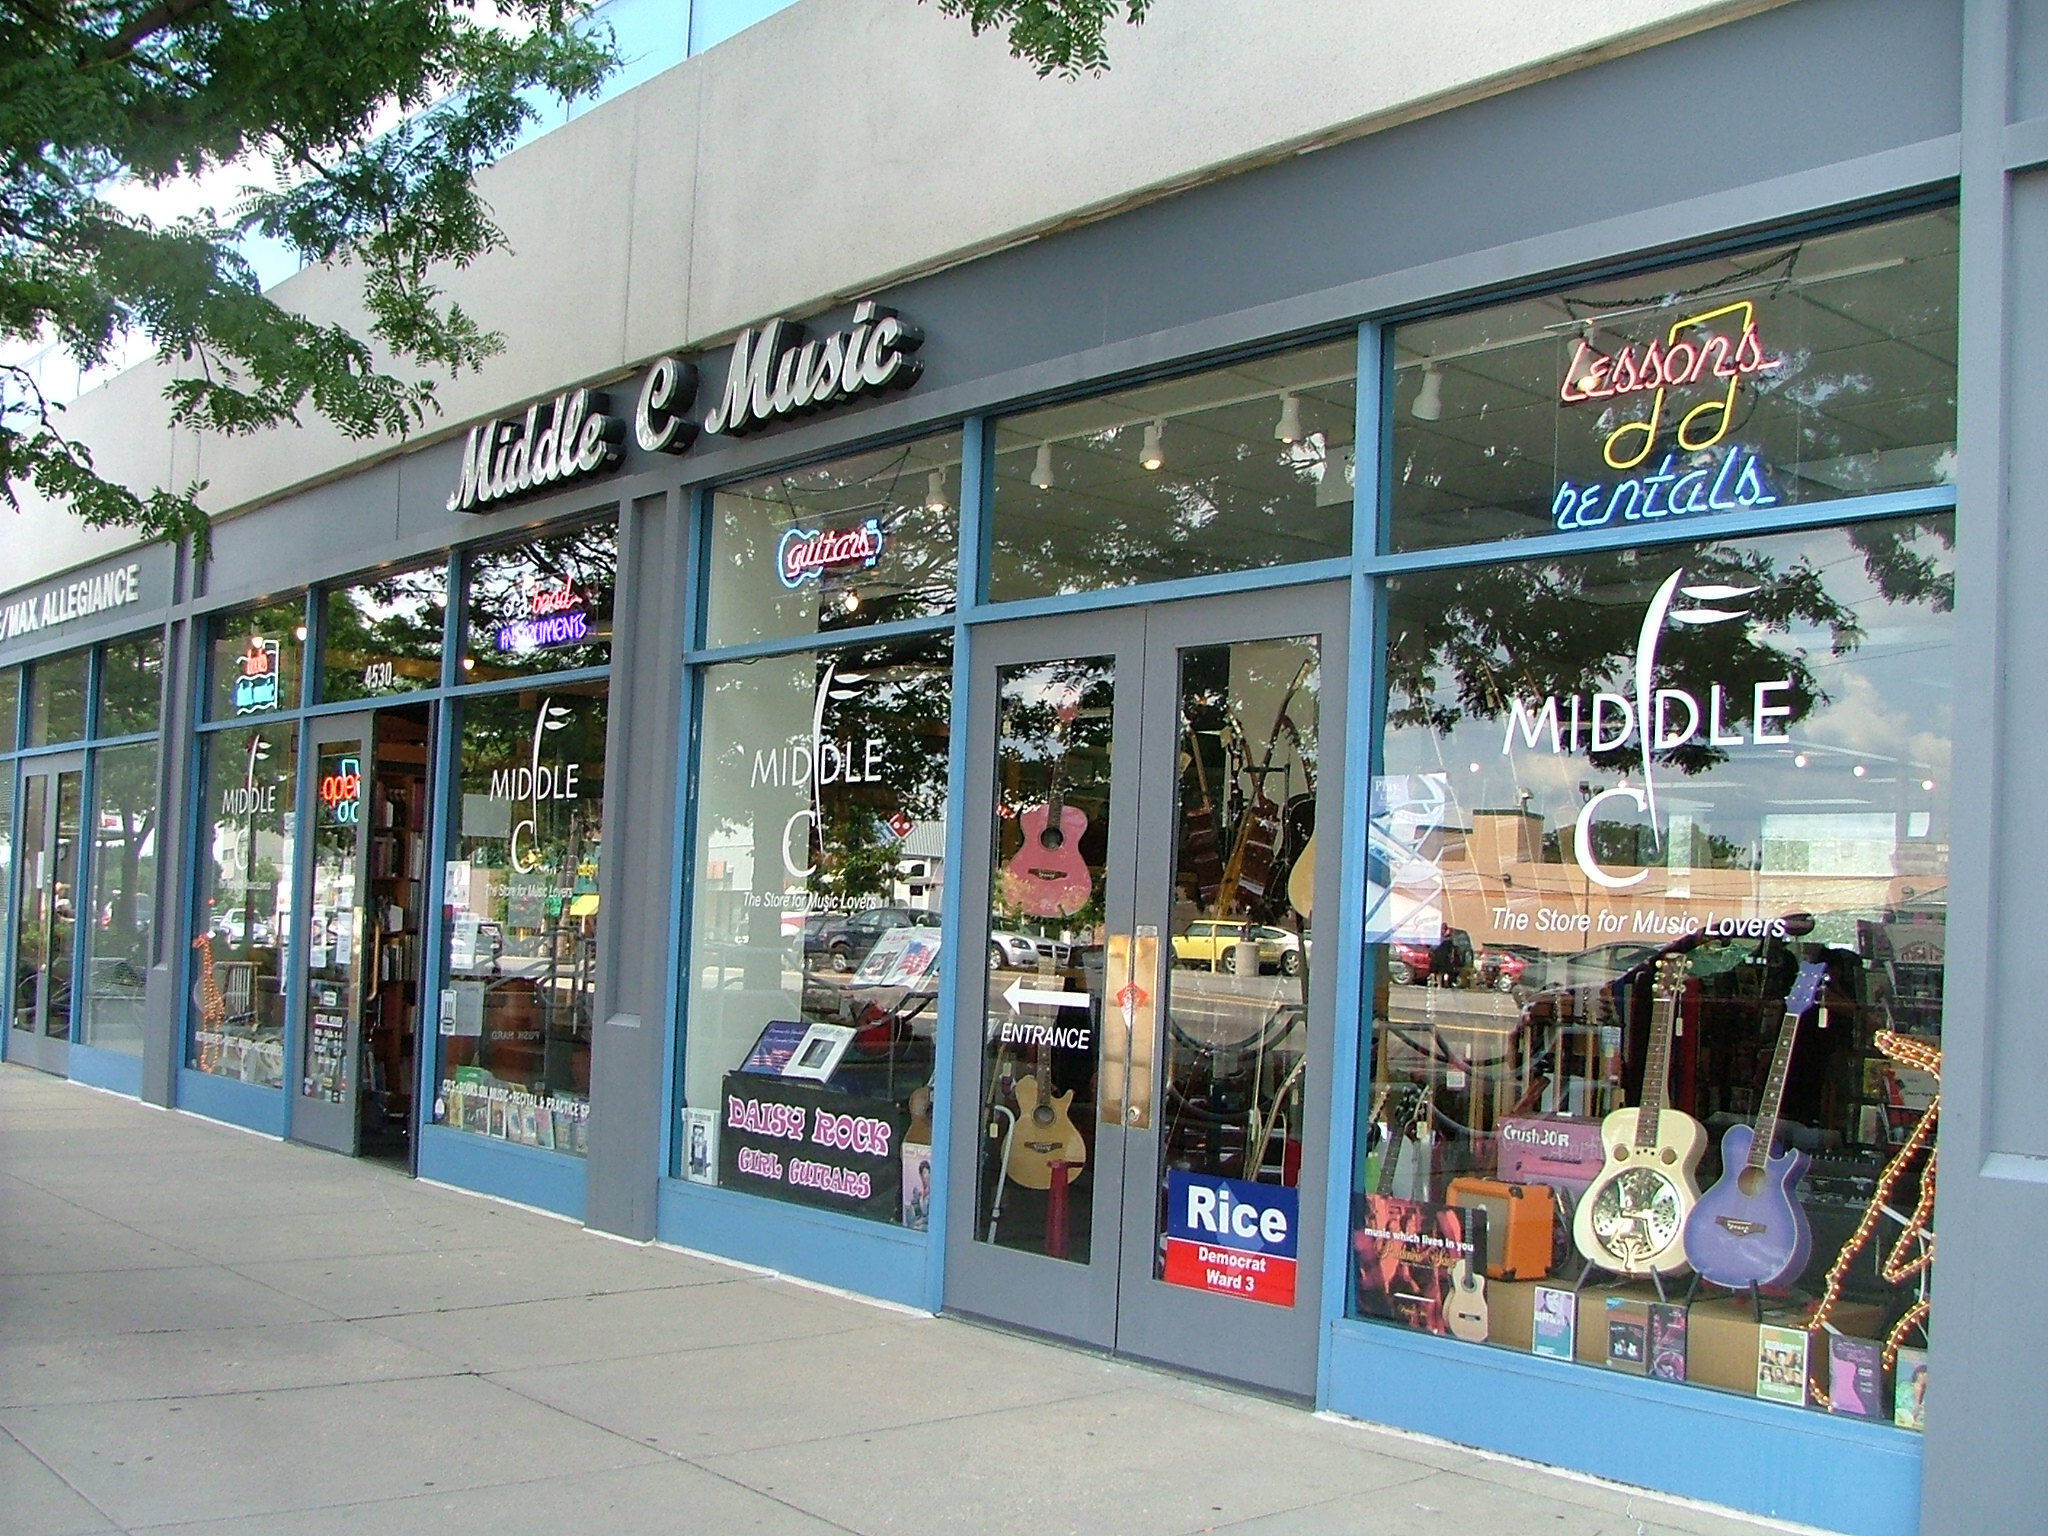 Middle C Music offers lessons, instrument rentals, and retail for the Washington, D.C. community.